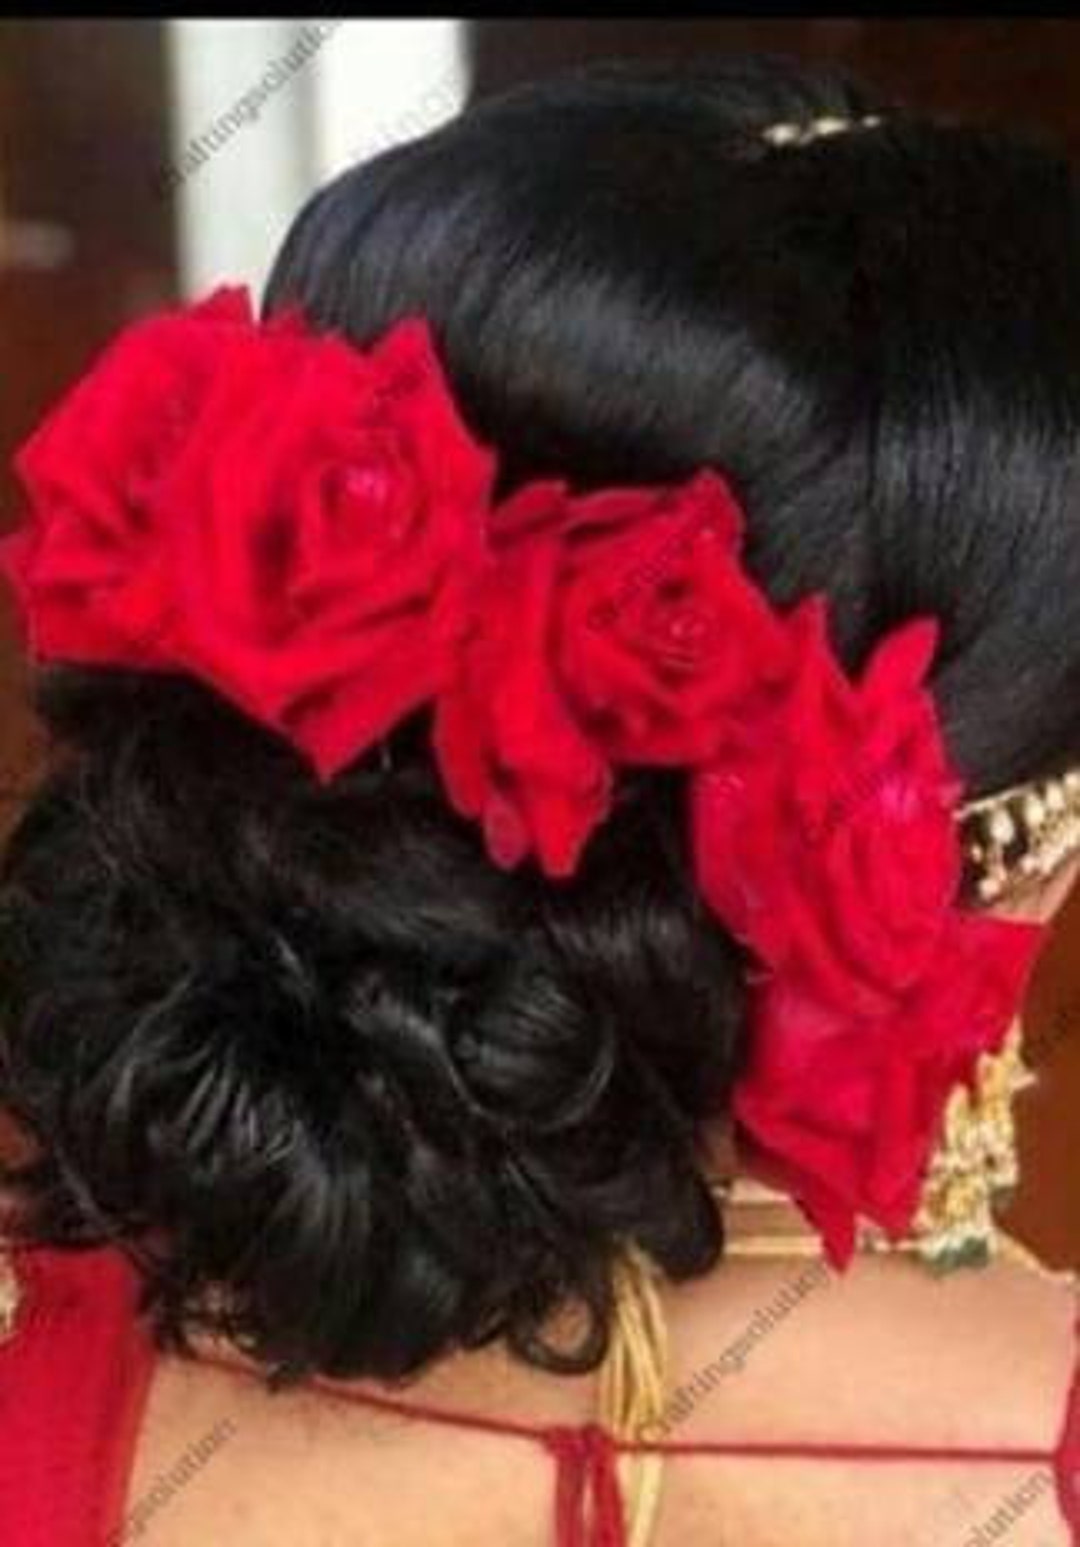 Buy Rose Gajra Hair Accessory Veni Flower Jewelry Wedding Jewellery for Bride Pink - Indian Inspired - LoveNspire